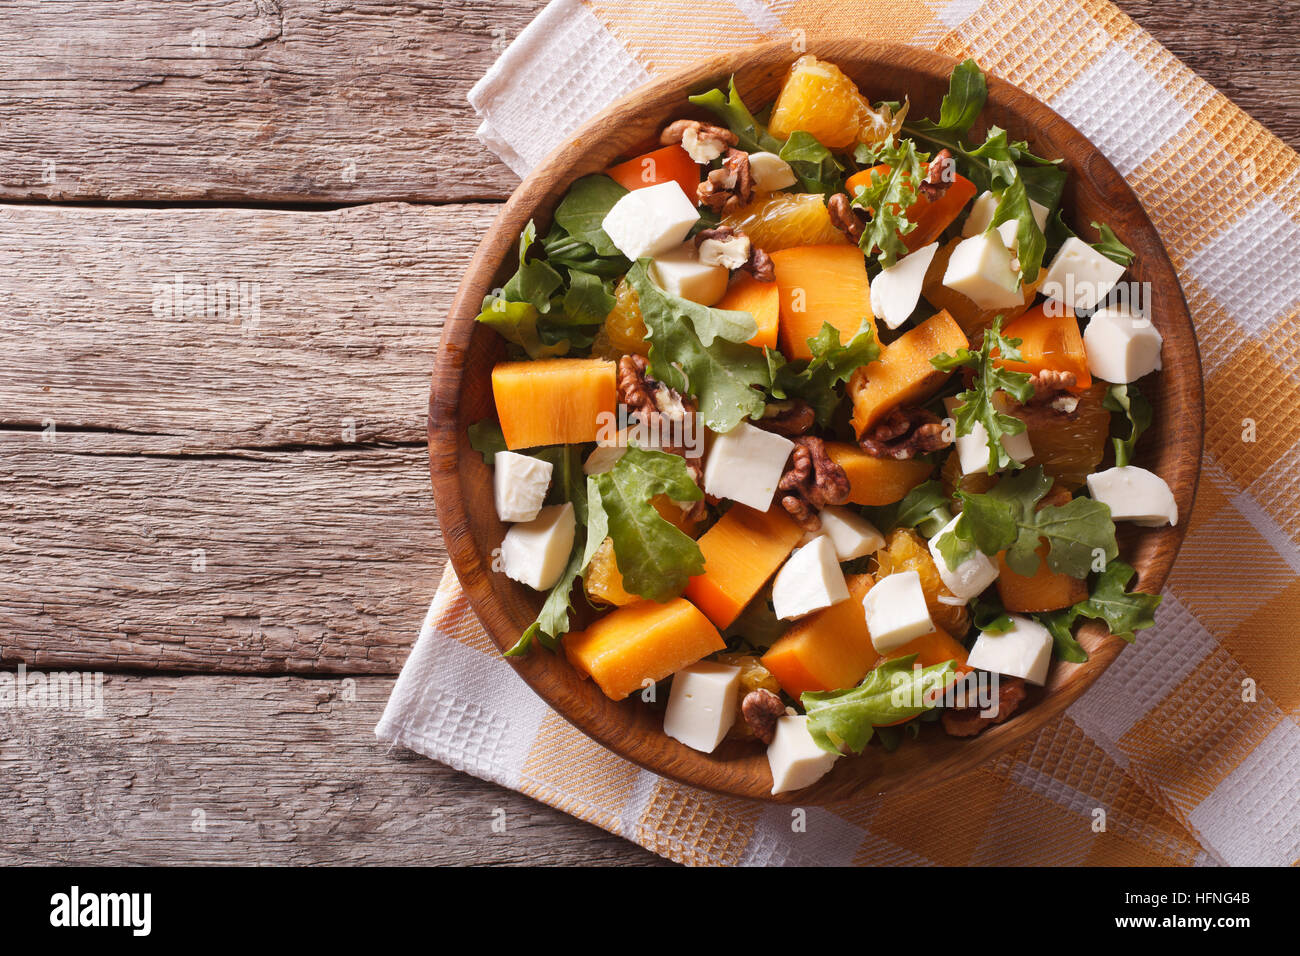 salad with persimmon, arugula, oranges, nuts and cheese on the table. horizontal view from above Stock Photo